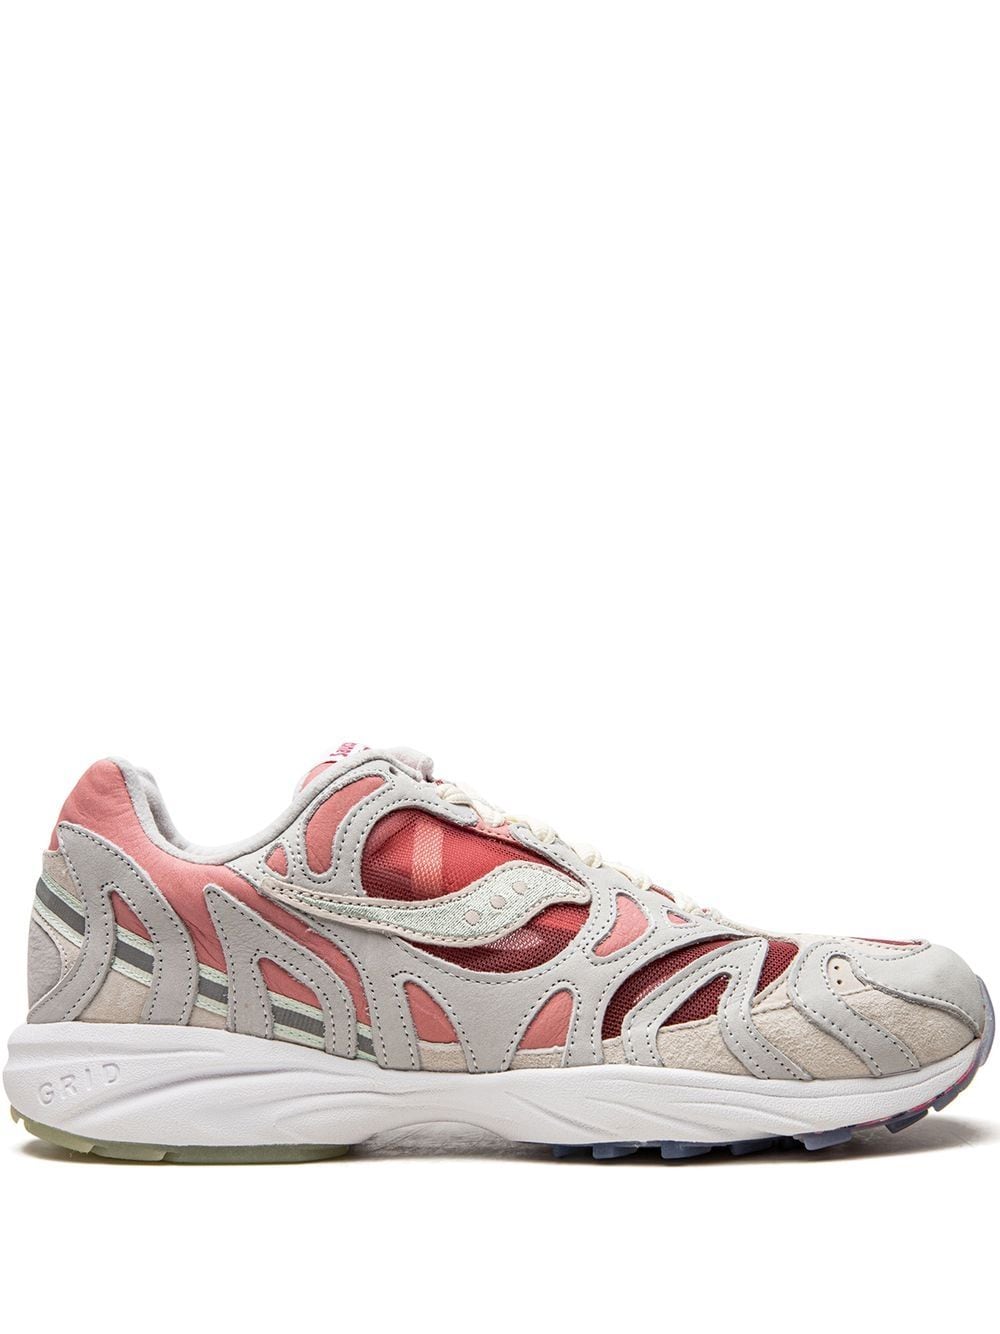 Saucony Sacouny Grid Azura 2000 "End Clothing" sneakers - Pink von Saucony